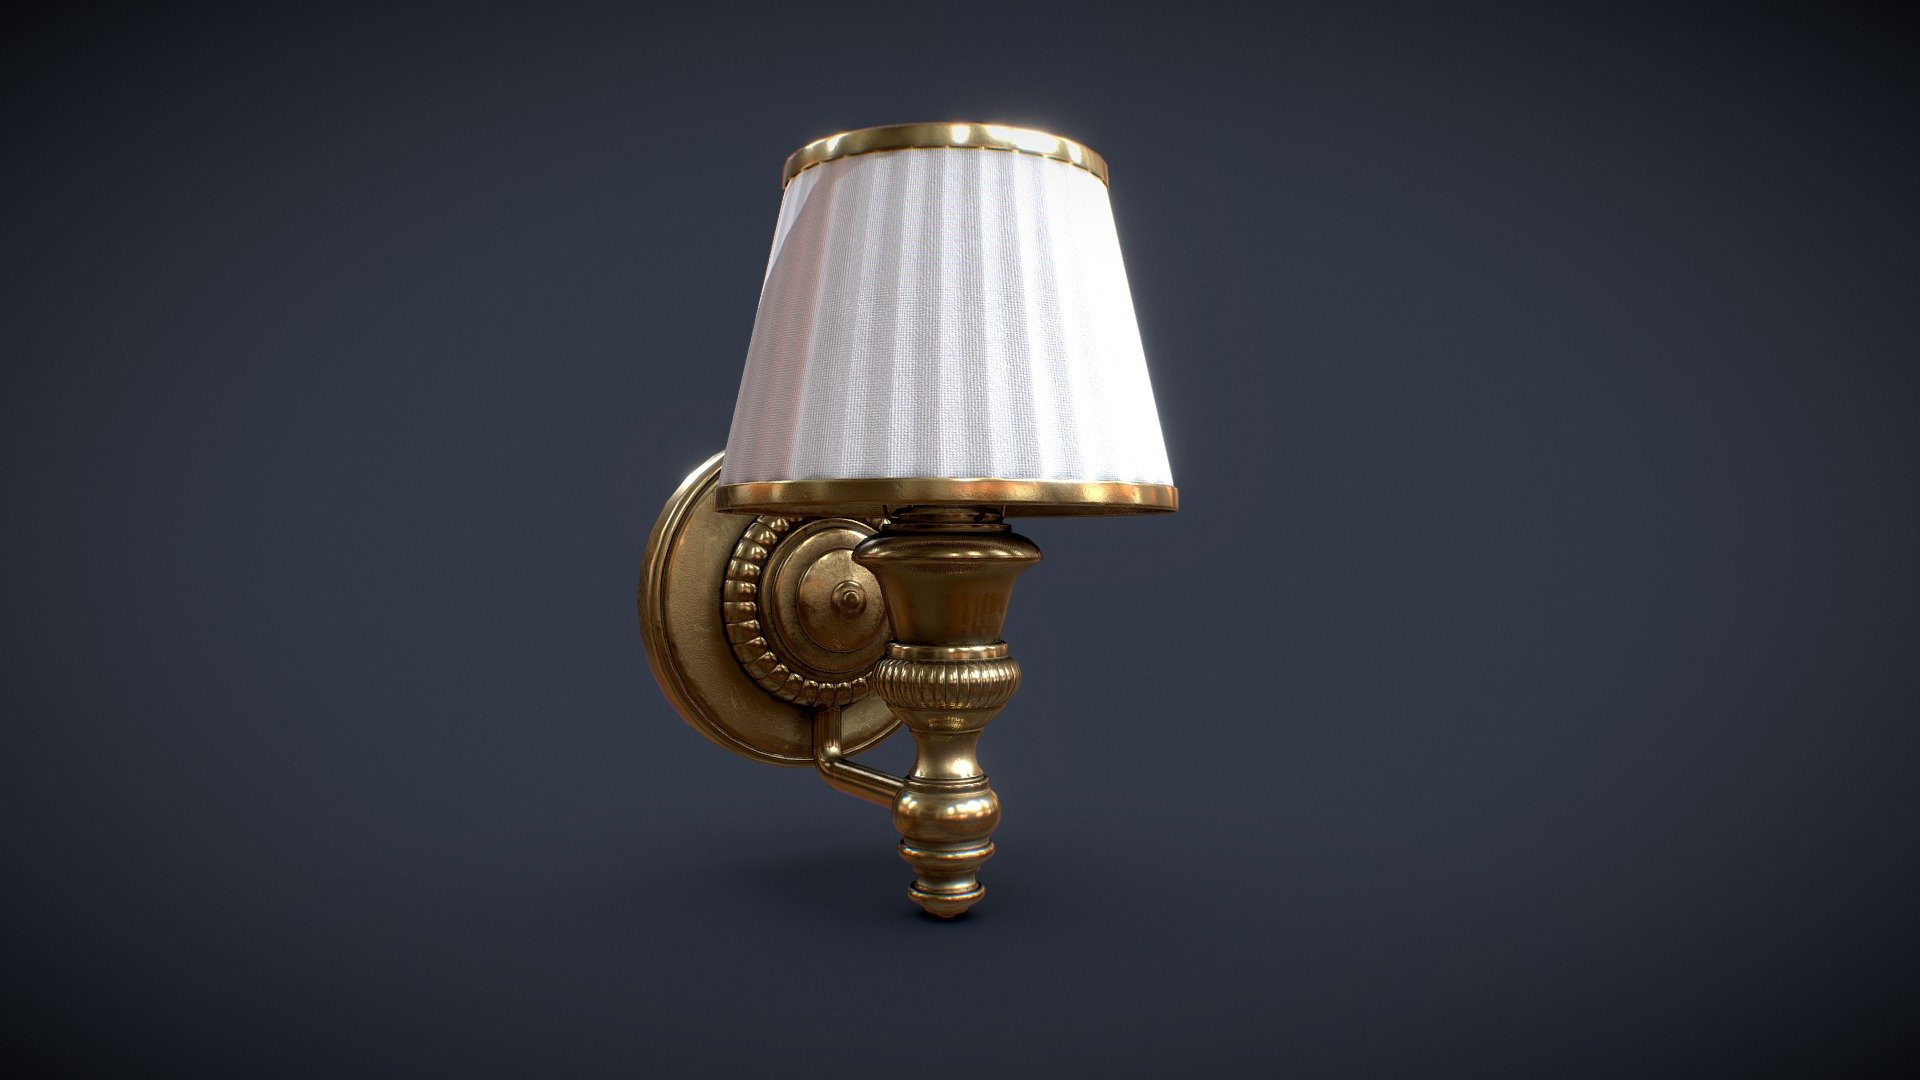 Hello All :) This is a wall lamp made for a personal victorian project. Ligth and shine !

Made with Maya, PS and Substance.

You will find in the package Scene file, FBX and 4k Textures.
If you have any customs need, please feel free to contact me 3d model